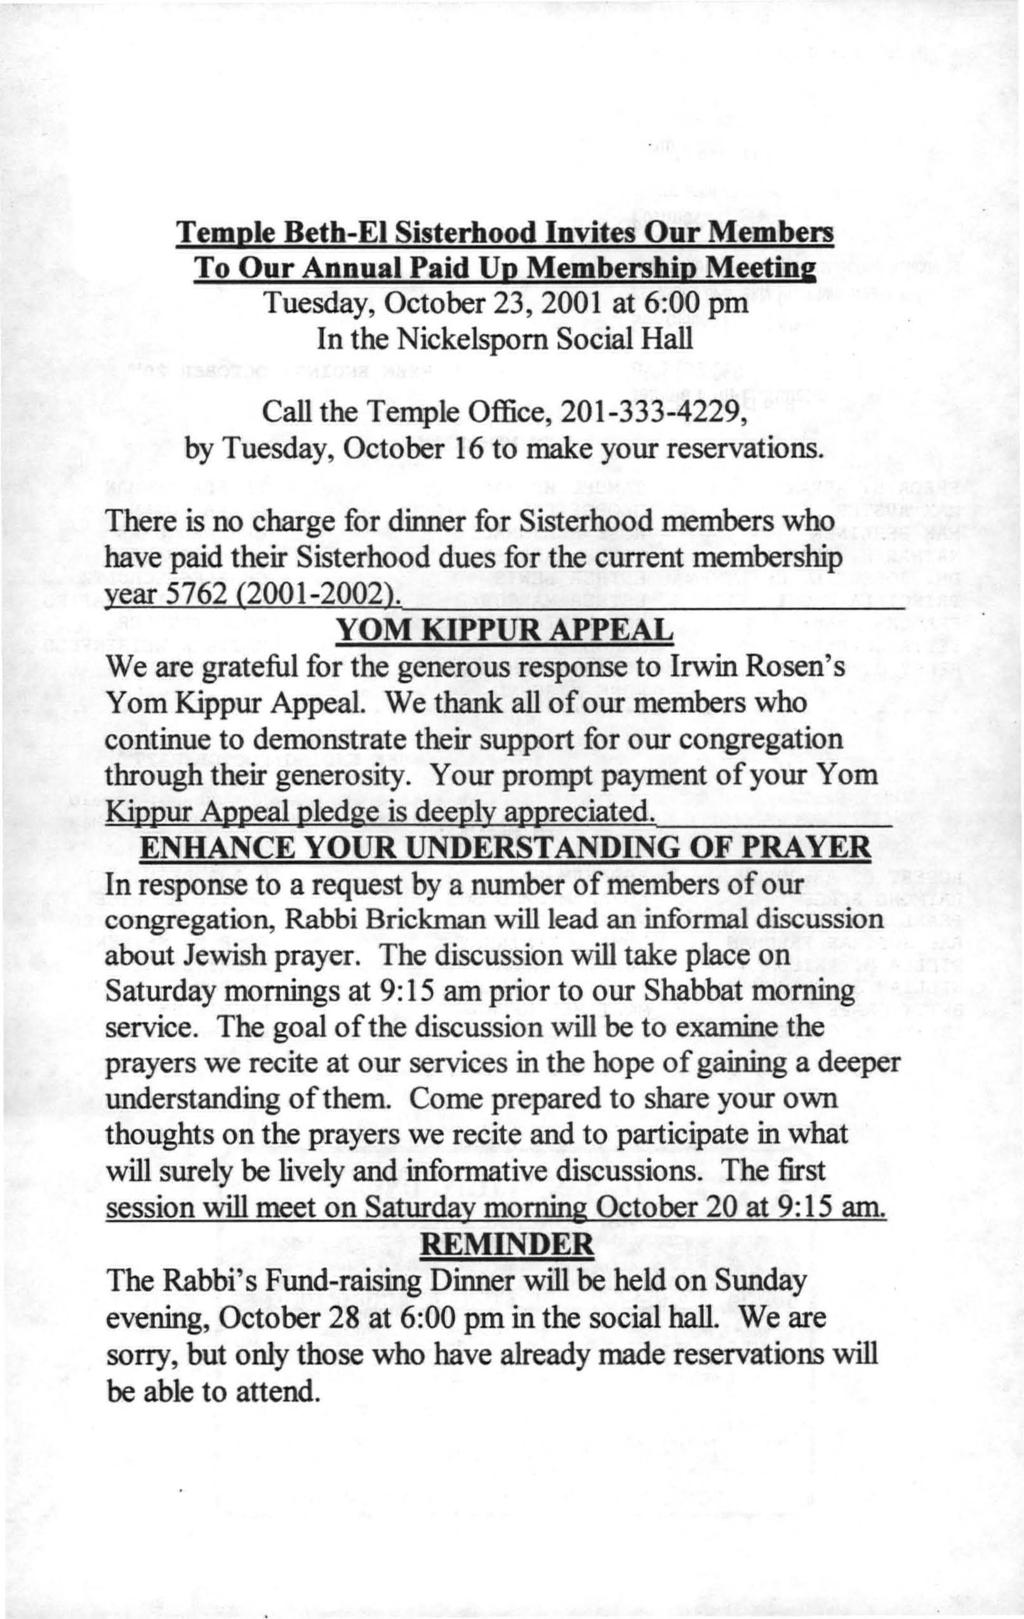 Temple Beth-EI Sisterhood Invites Our Members To Our Annual Paid Up Membership Meeting Tuesday, October 23, 2001 at 6:00 pm In the Nickelspom Social Hall Call the Temple Office, 201-333-4229, by